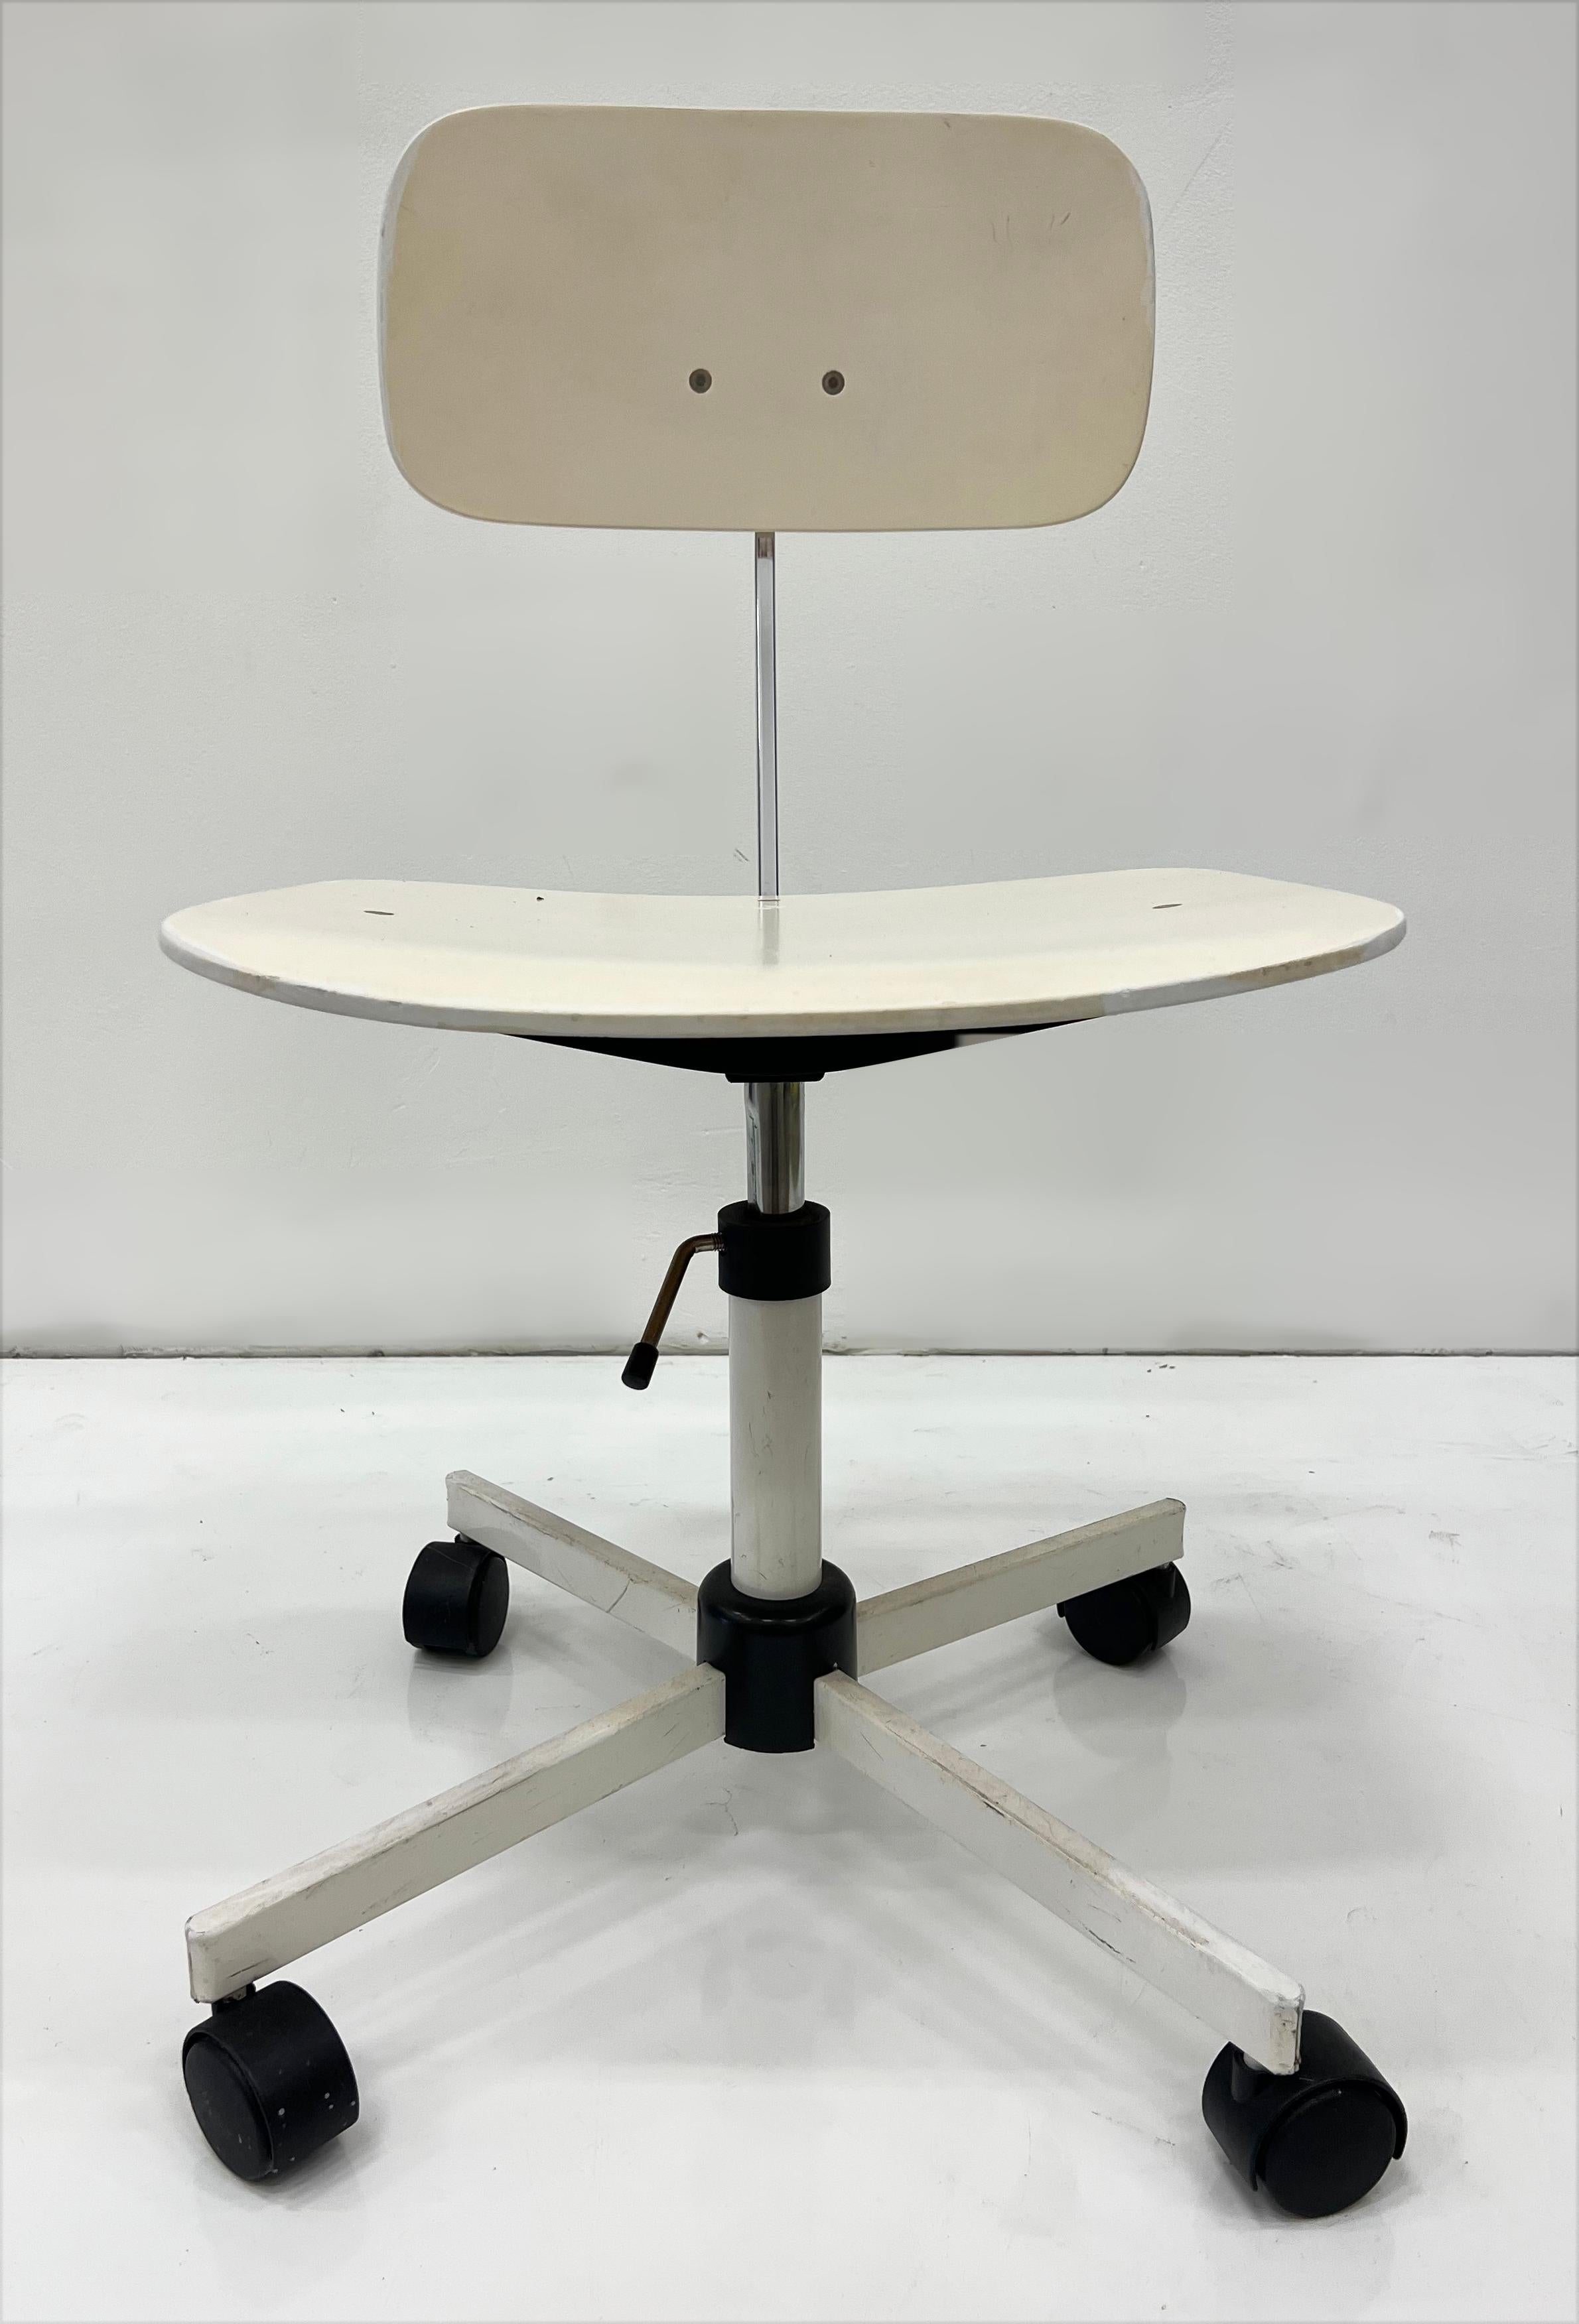 Danish mid-century Jørgen Rasmussen Kevi Chairs on Casters, Per Item

Offered for sale are vintage Mid-century Danish Modern Jørgen Rasmussen chairs on casters labeled made in Denmark. There are 4 chairs available and they are priced per item. The